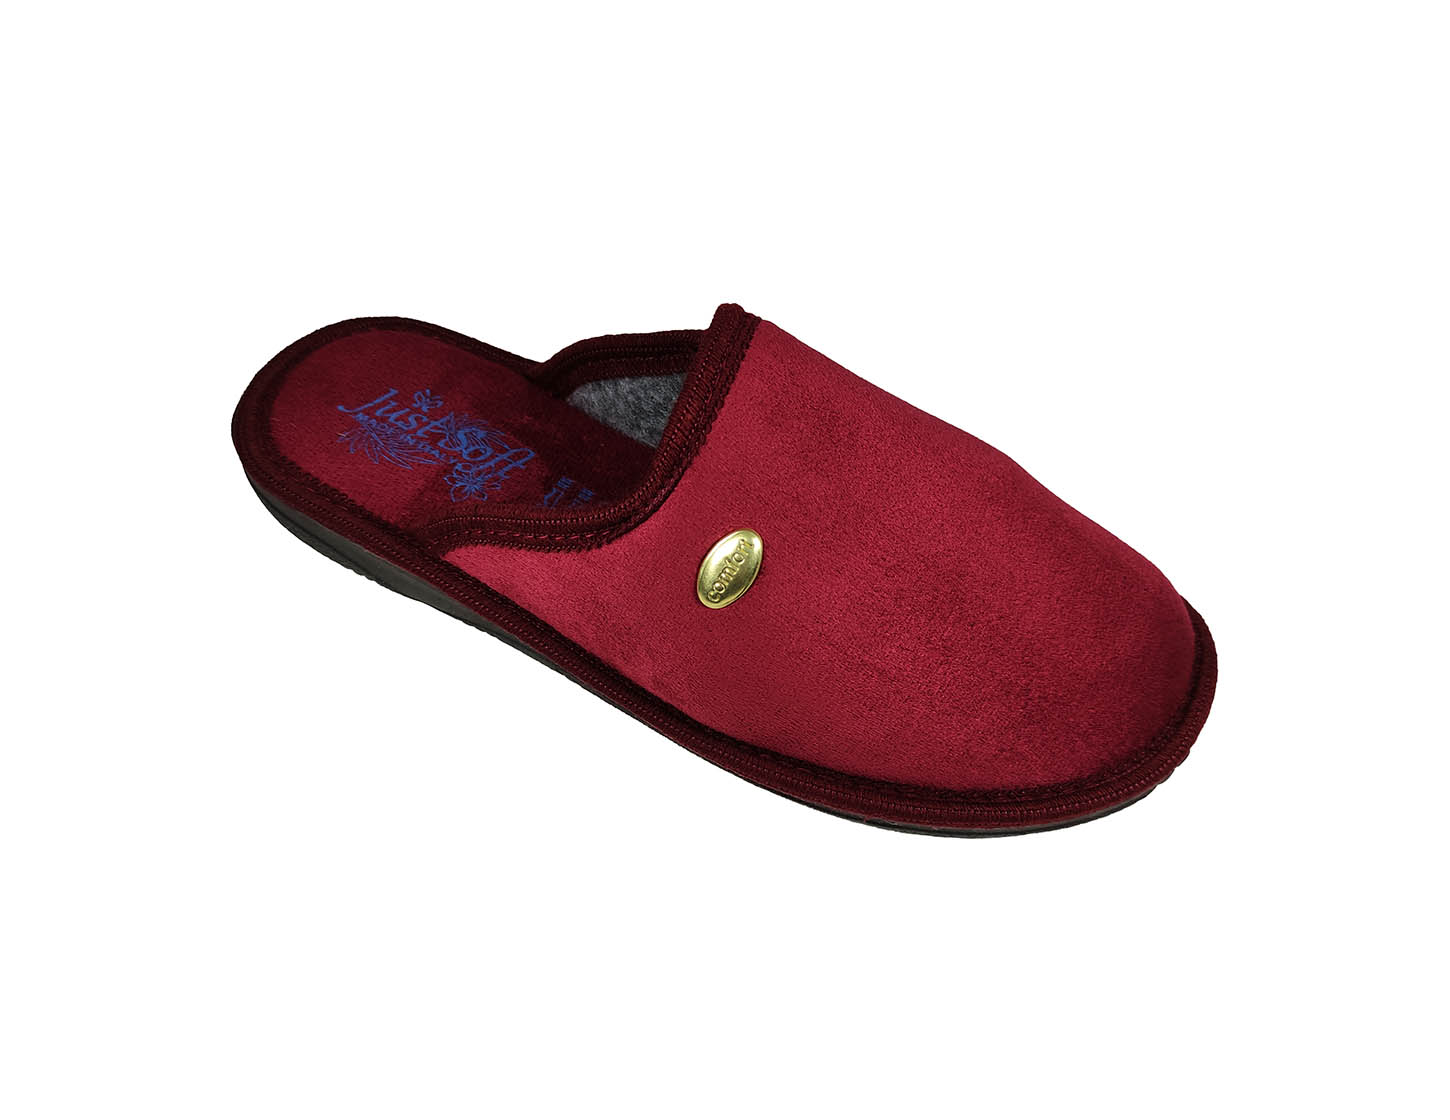 Womens Winter Slippers Just Soft 5399 Bordeaux